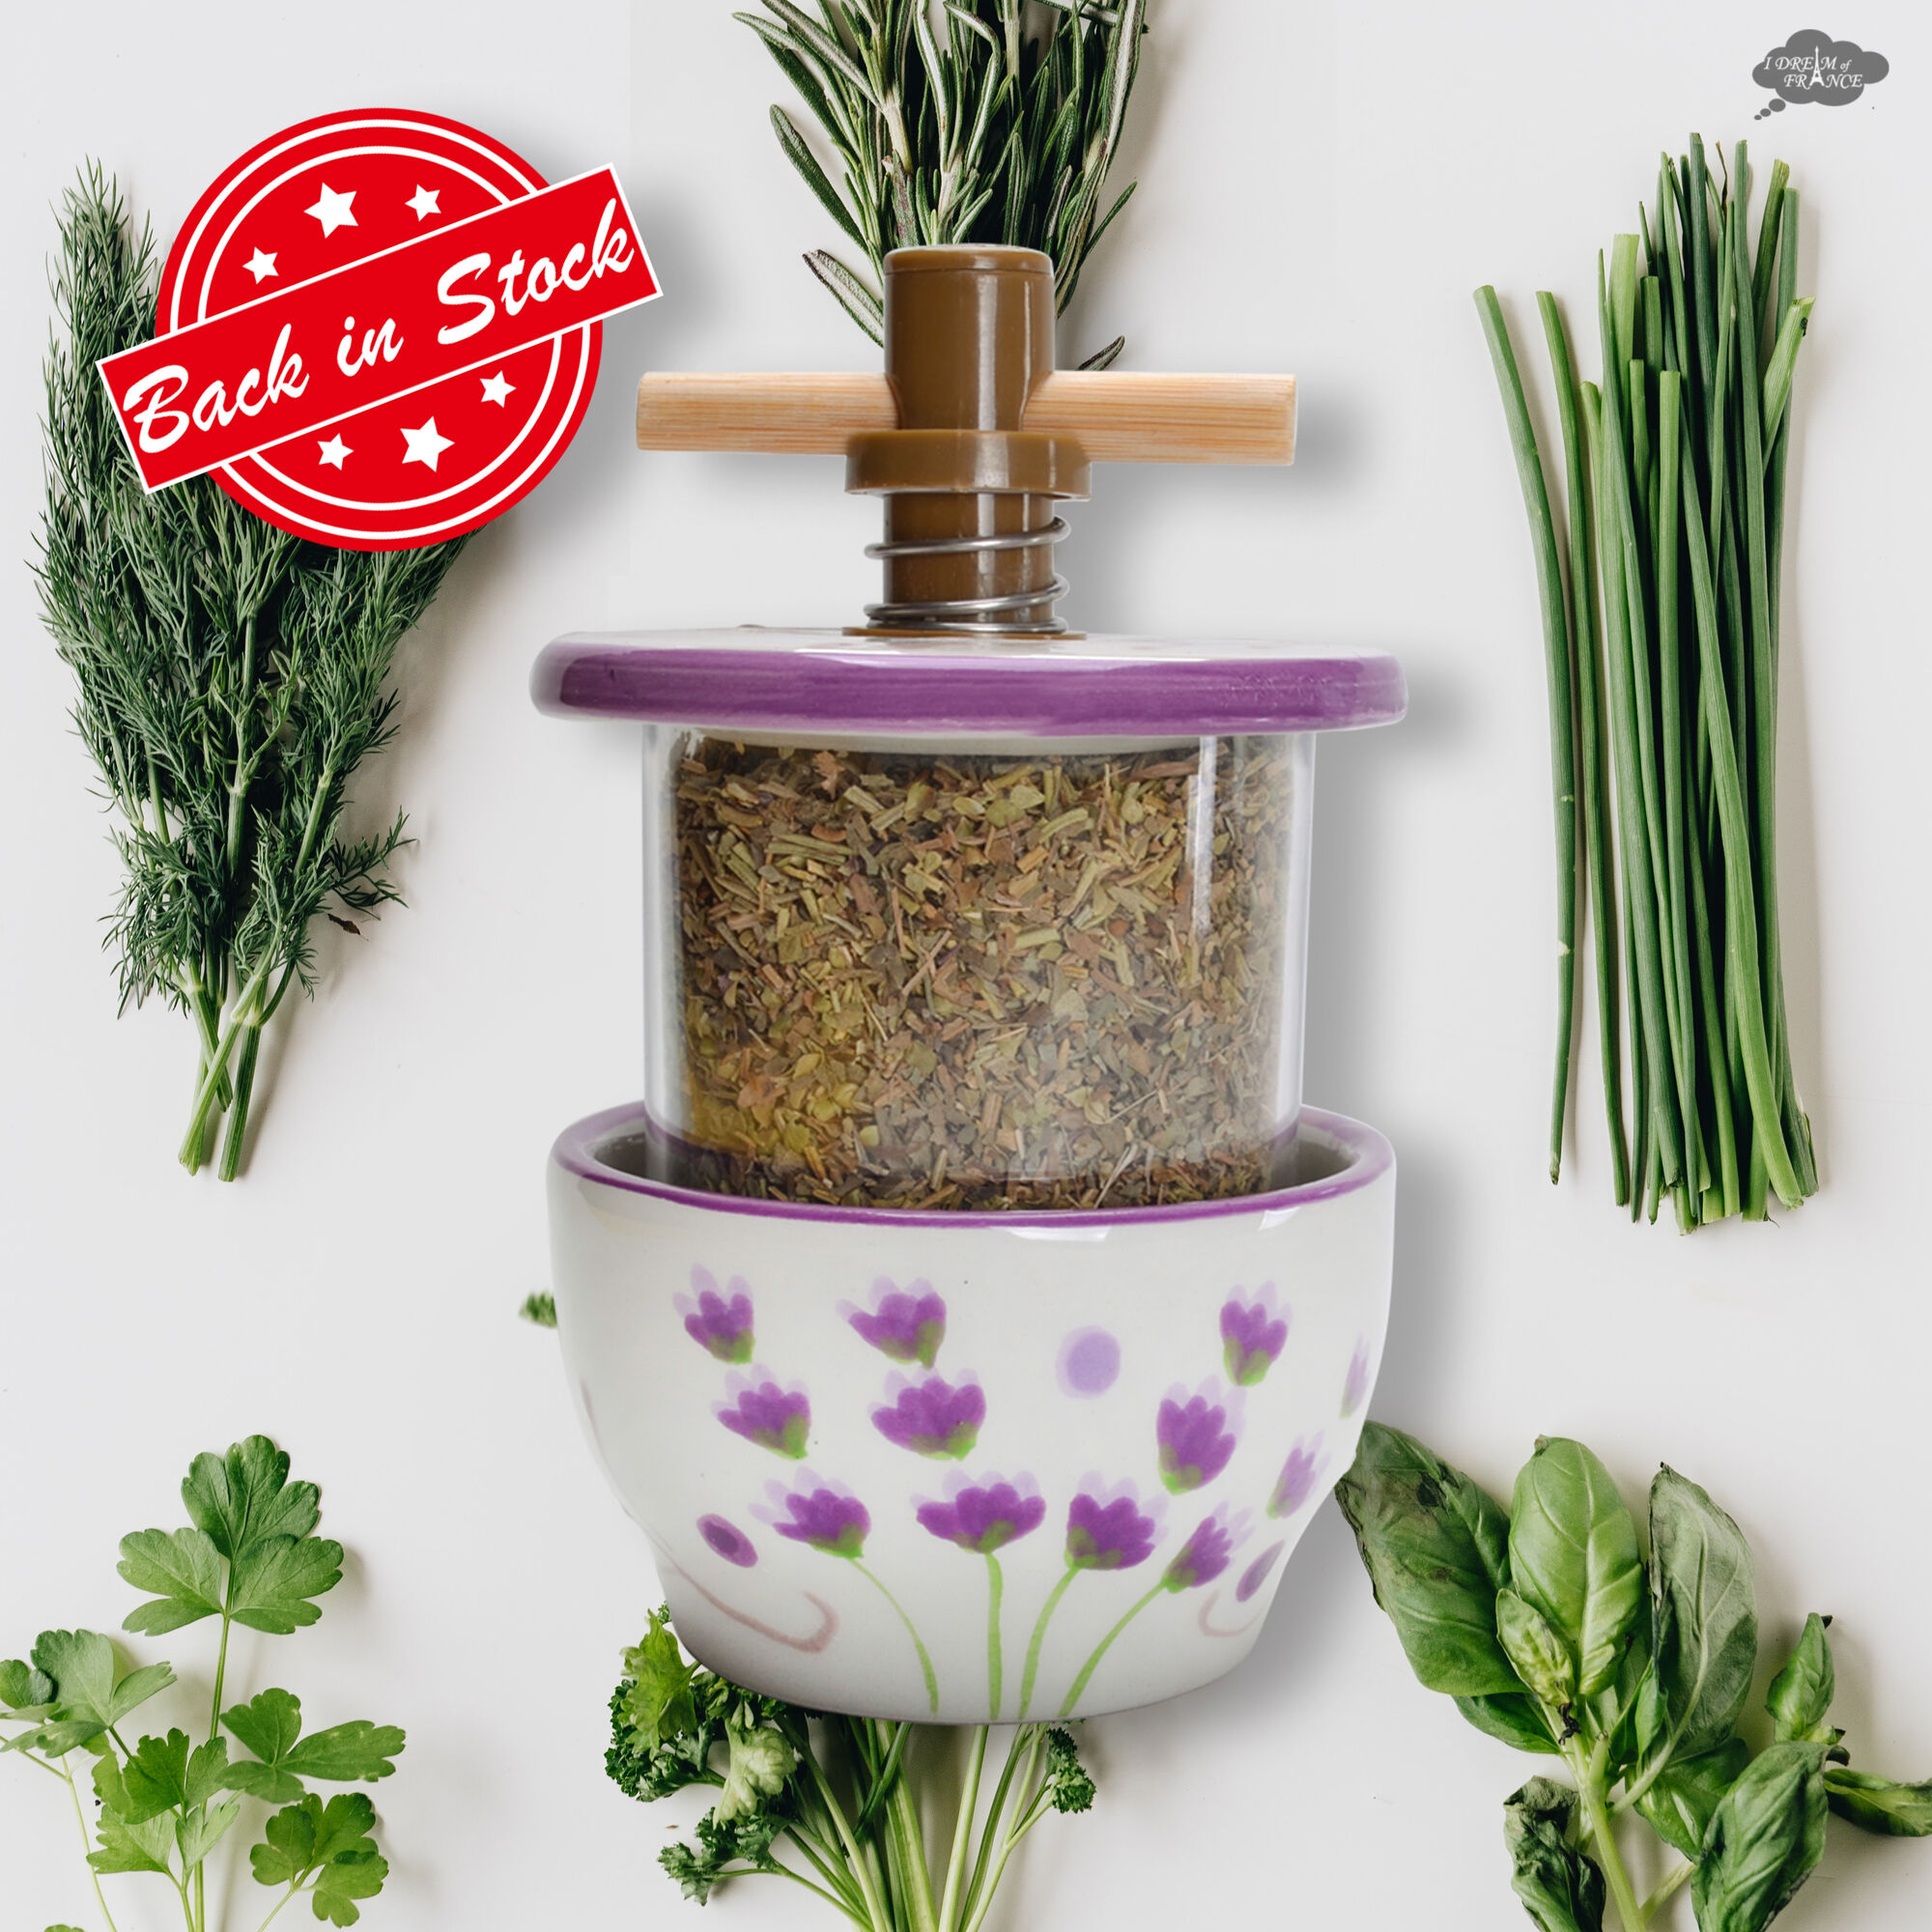 Try our Herbes de Provence in your next dish!